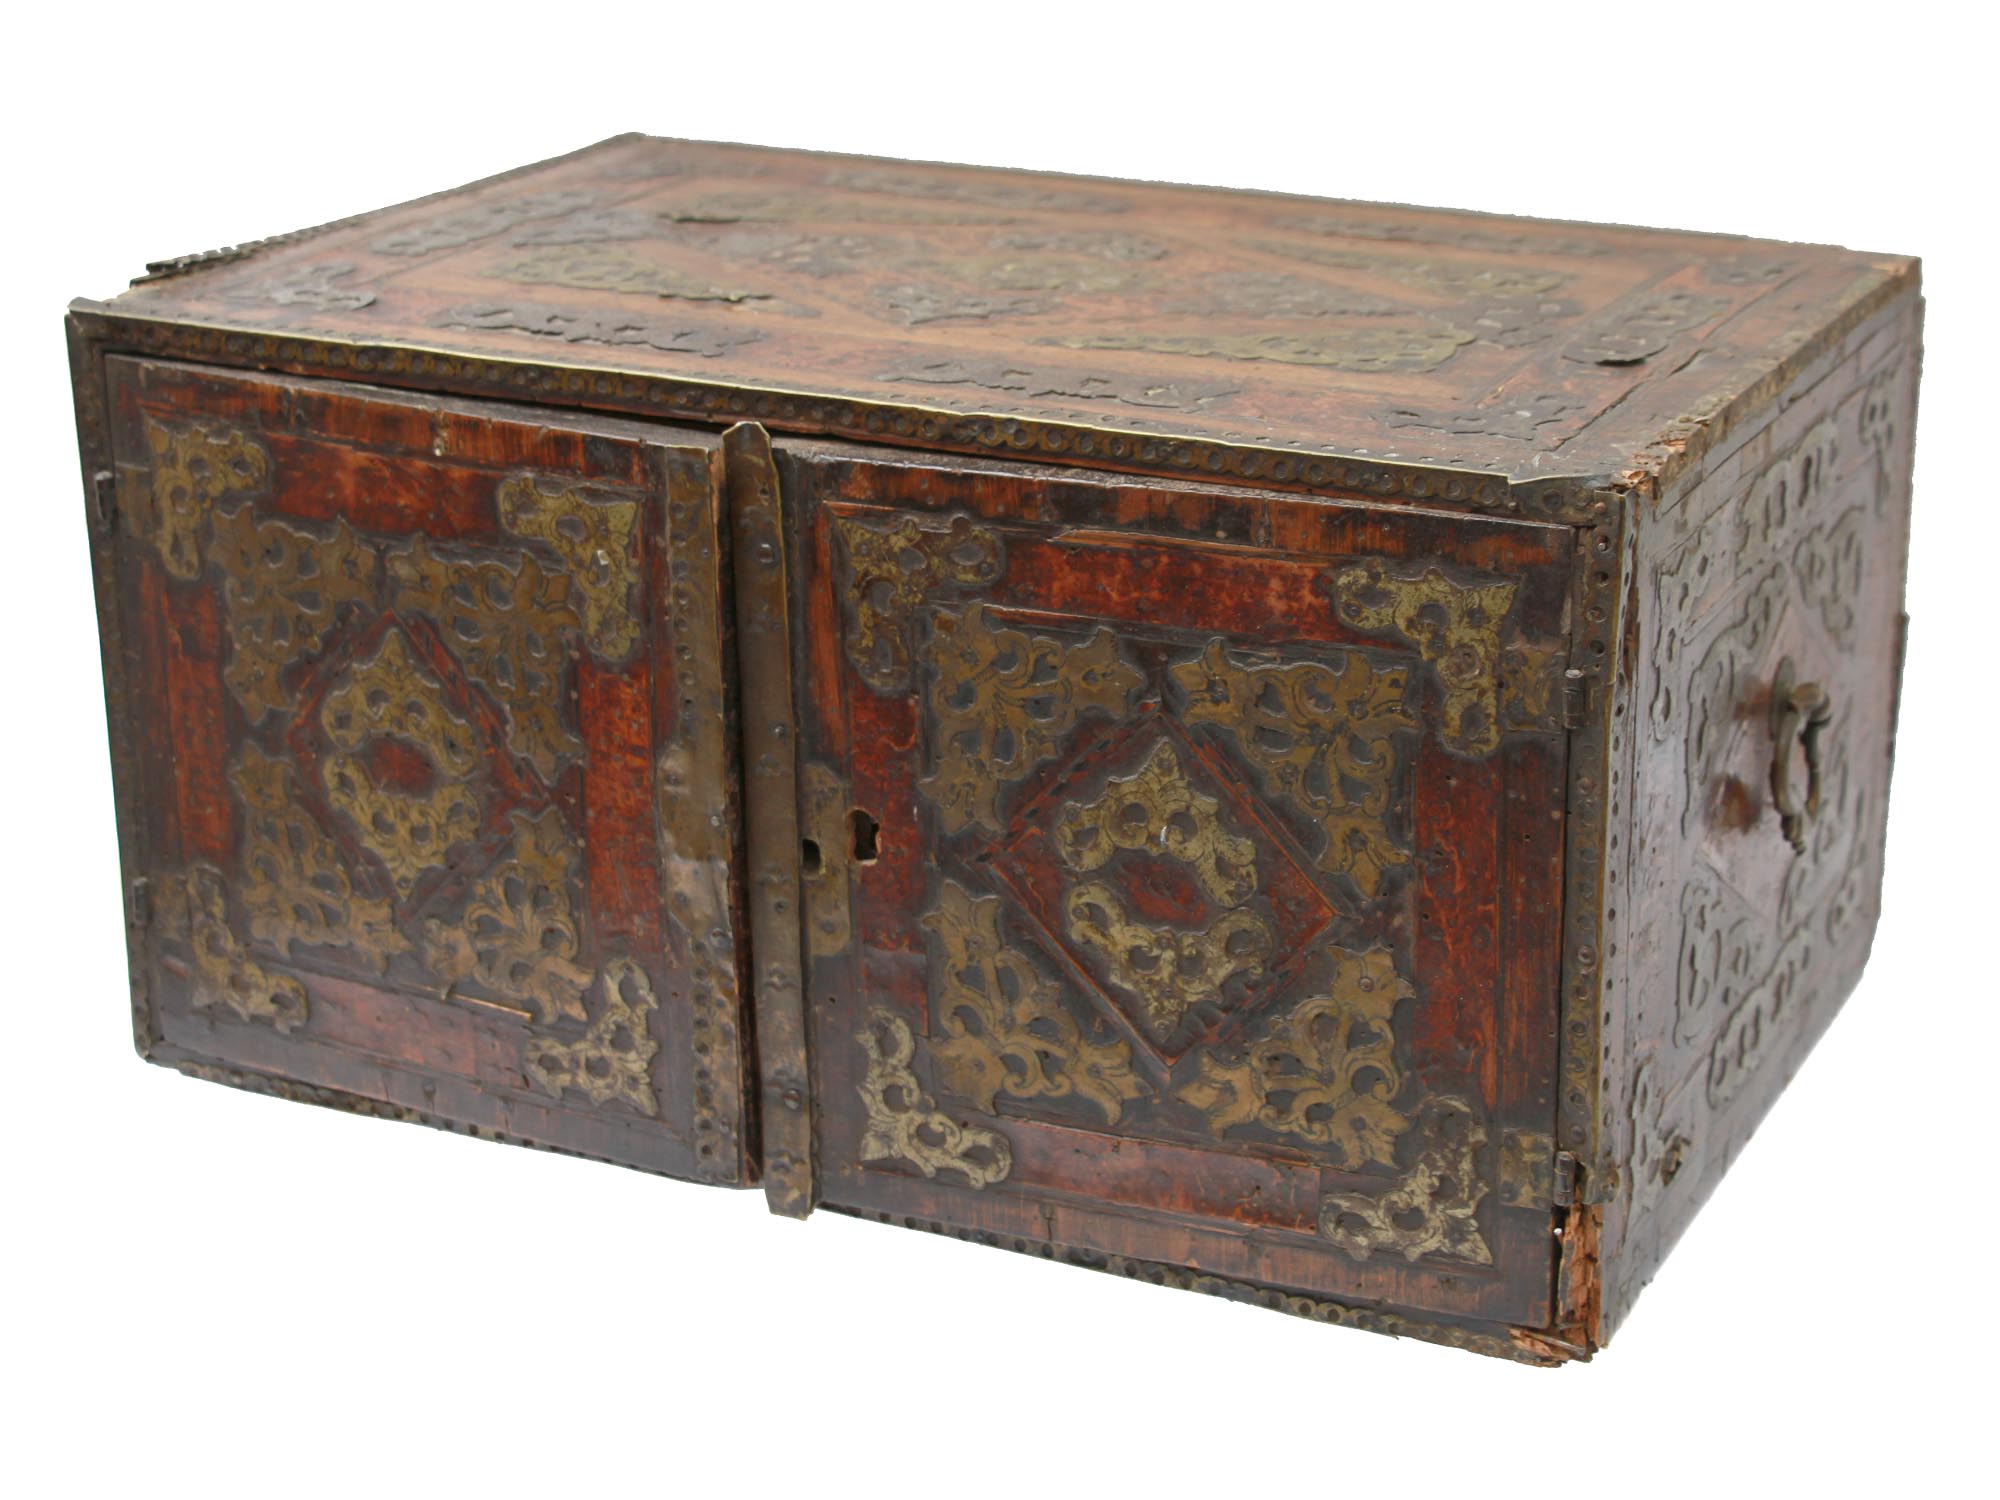 AN ANTIQUE COLONIAL SPANISH JEWELRY BOX 18TH C. PIC-0